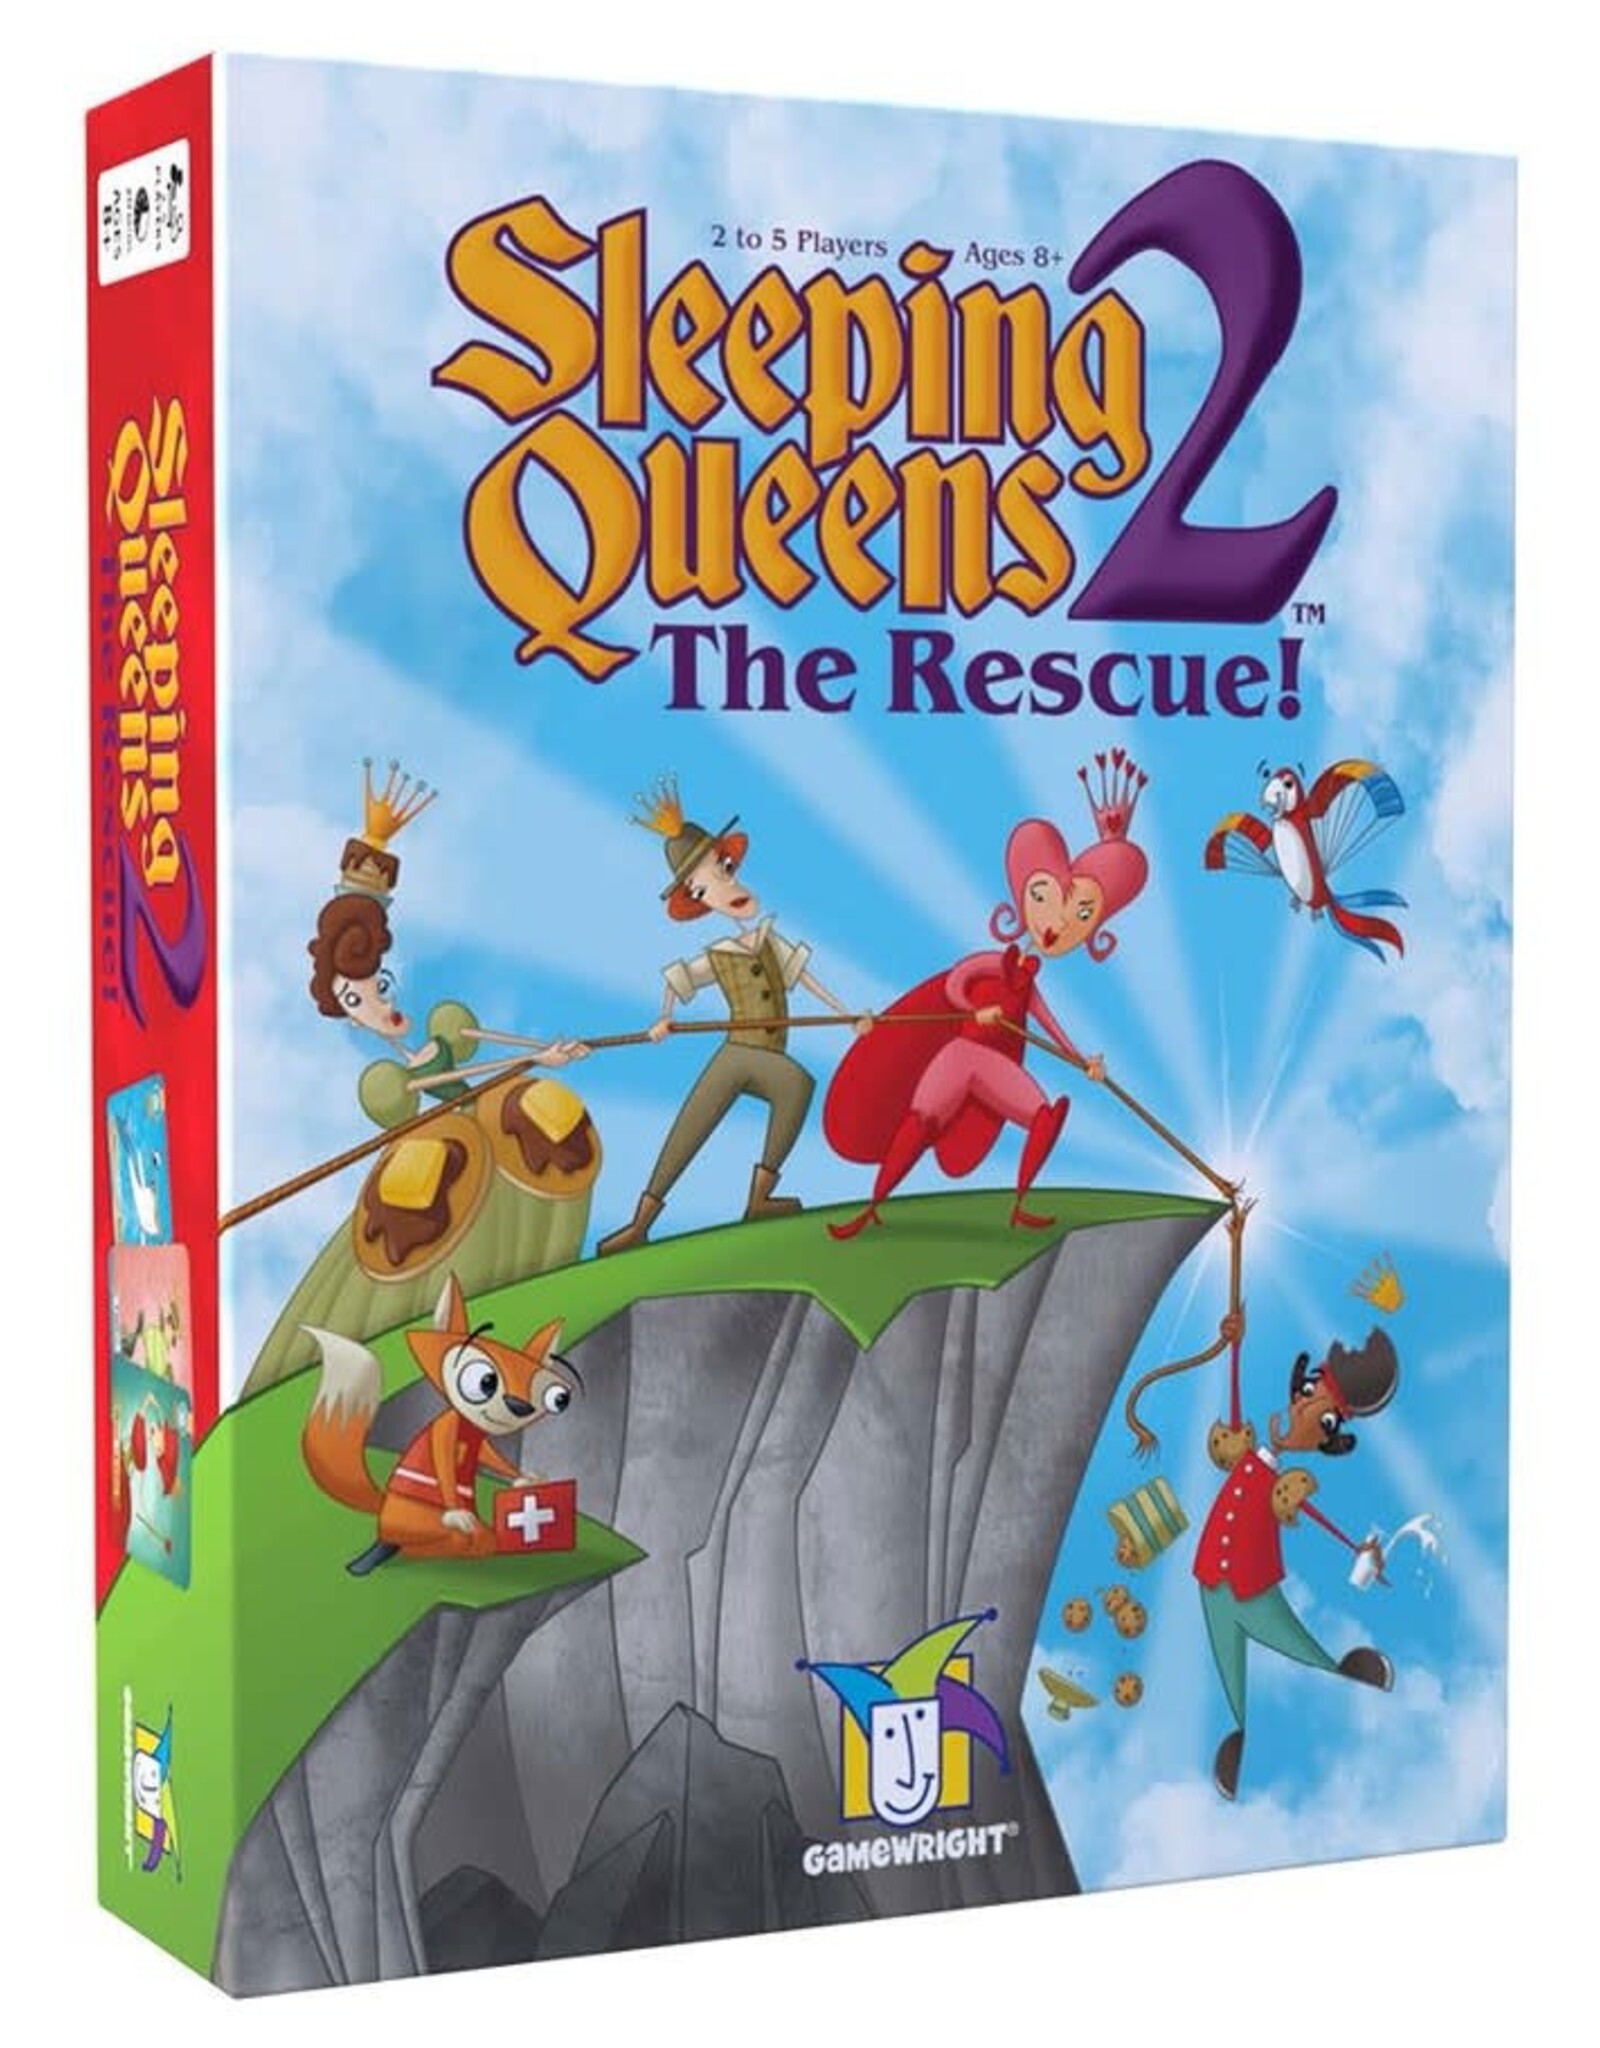 Sleeping Queens 2: The Rescue